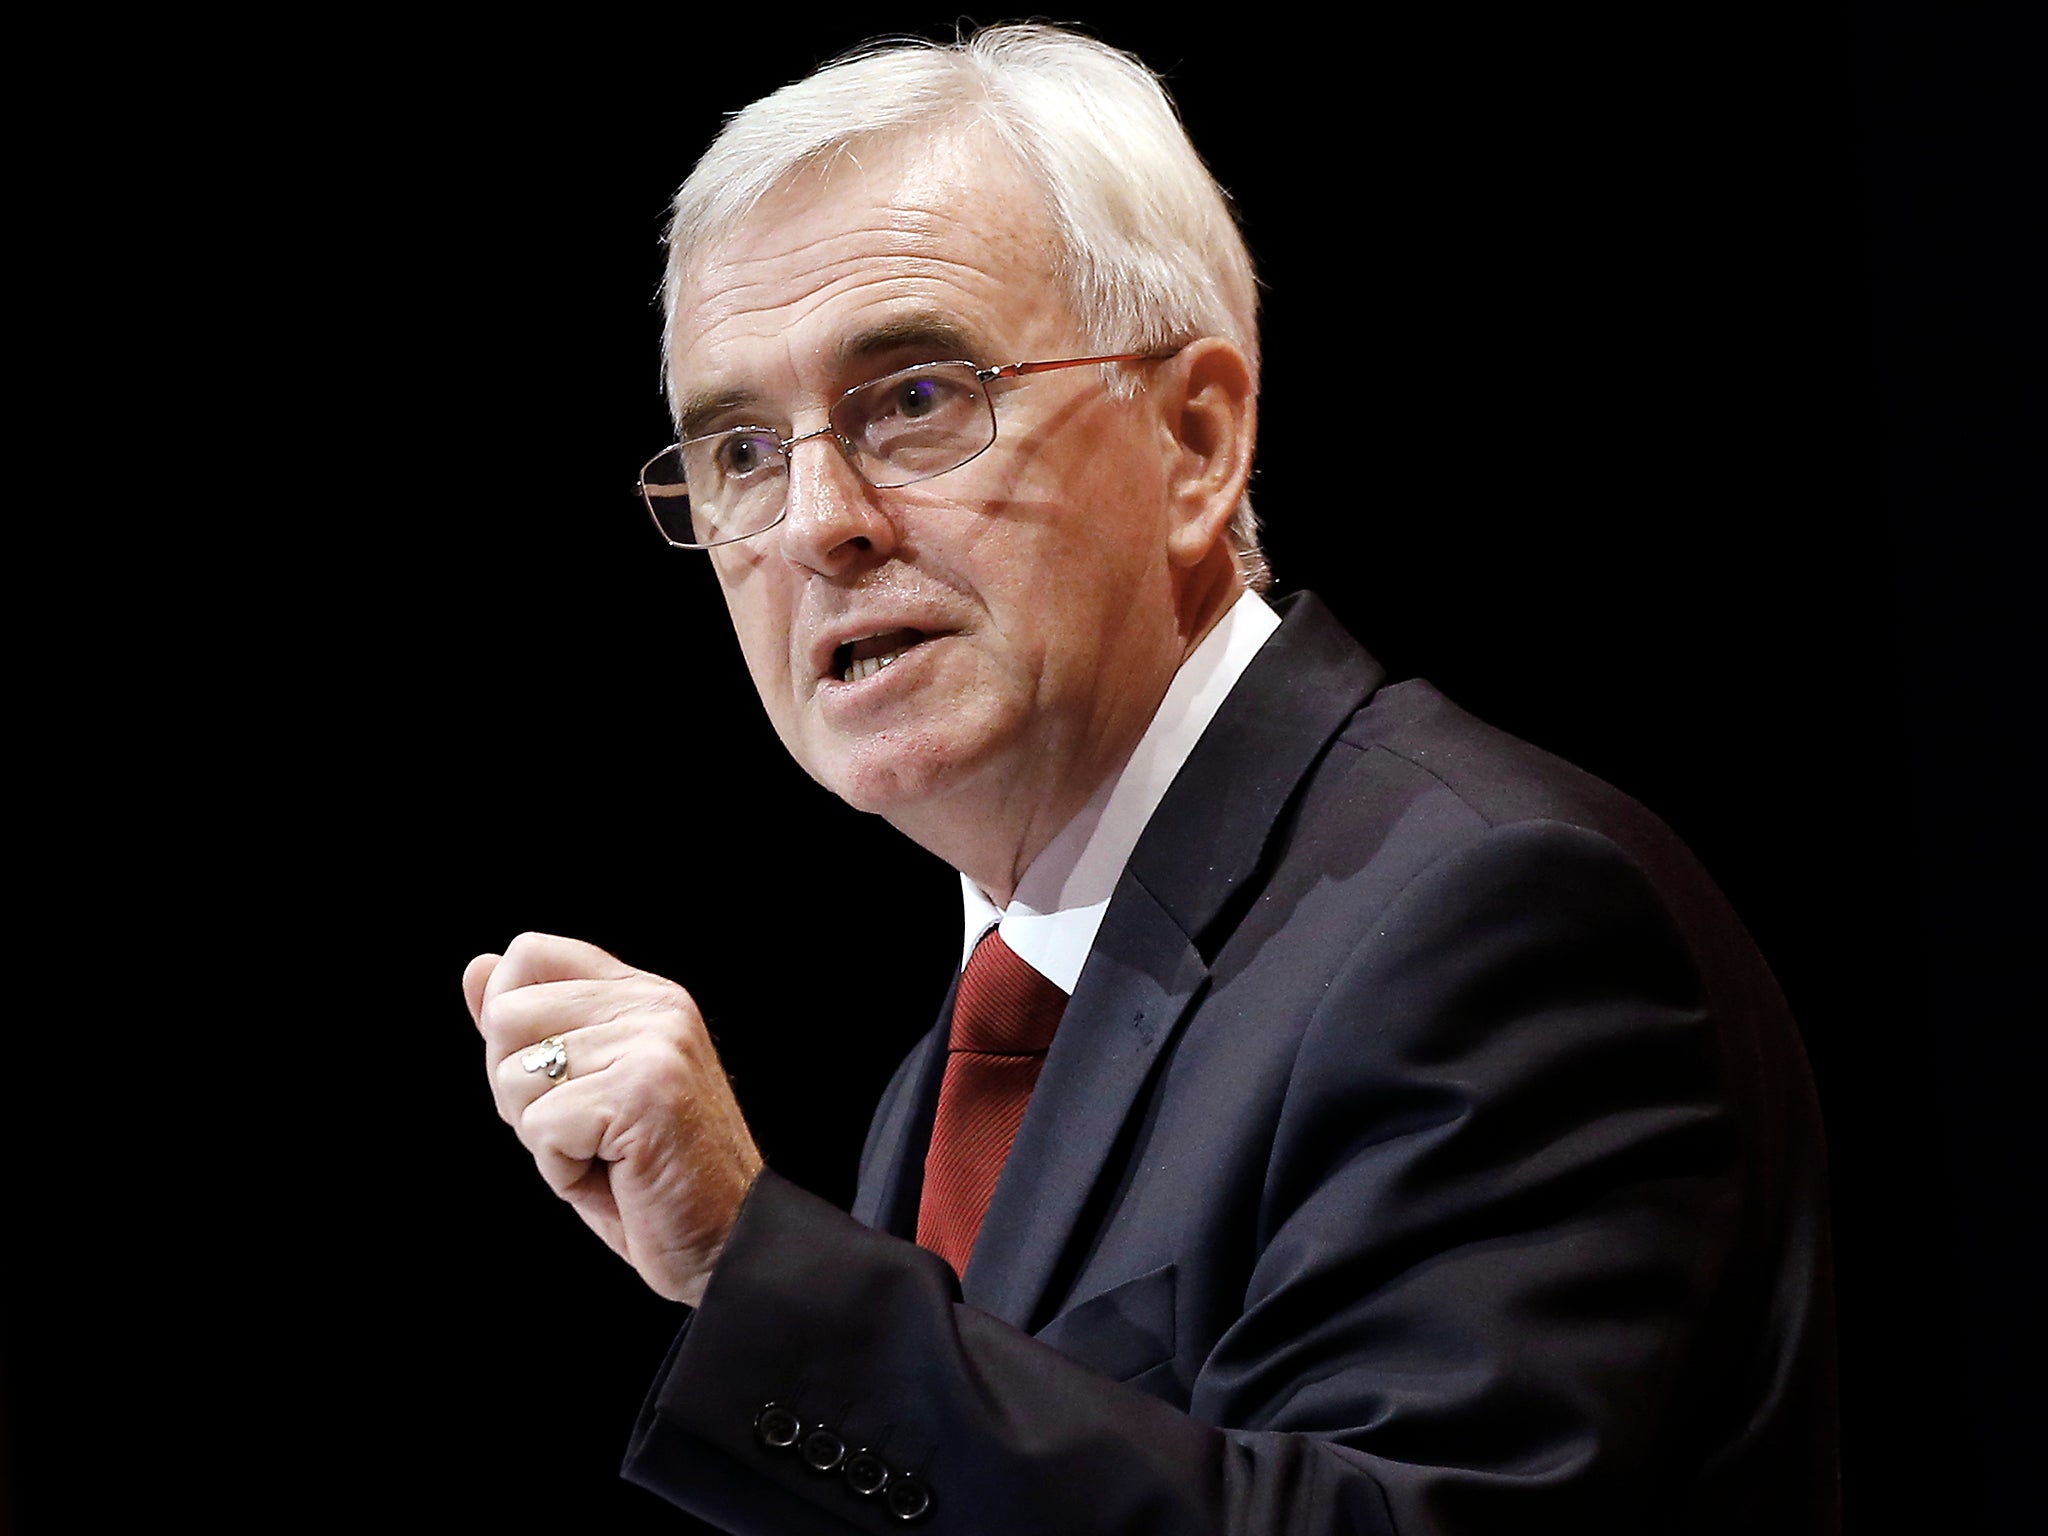 John McDonnell said the policy would end the ‘national scandal’ of low-paid families being trapped in debt